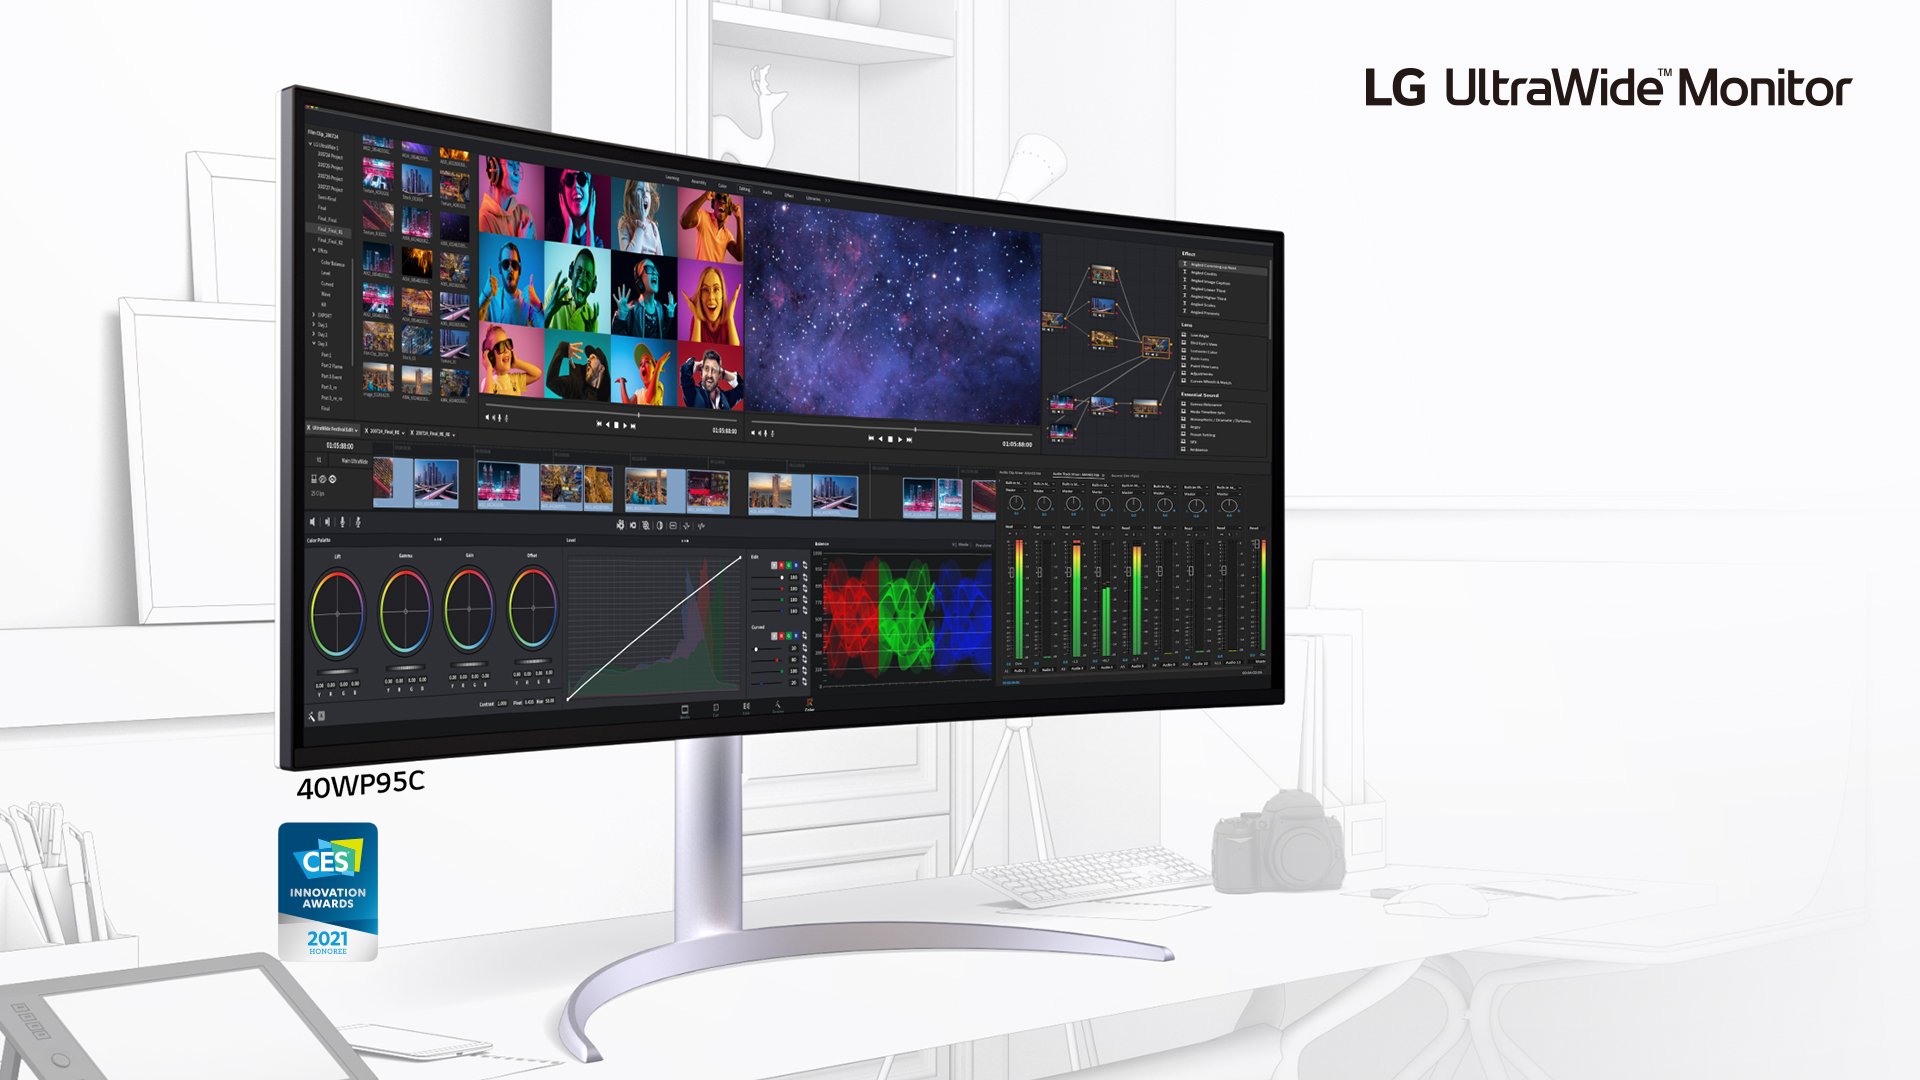 LG announces new UltraGear, UltraWide, and UltraFine monitors at CES 2021